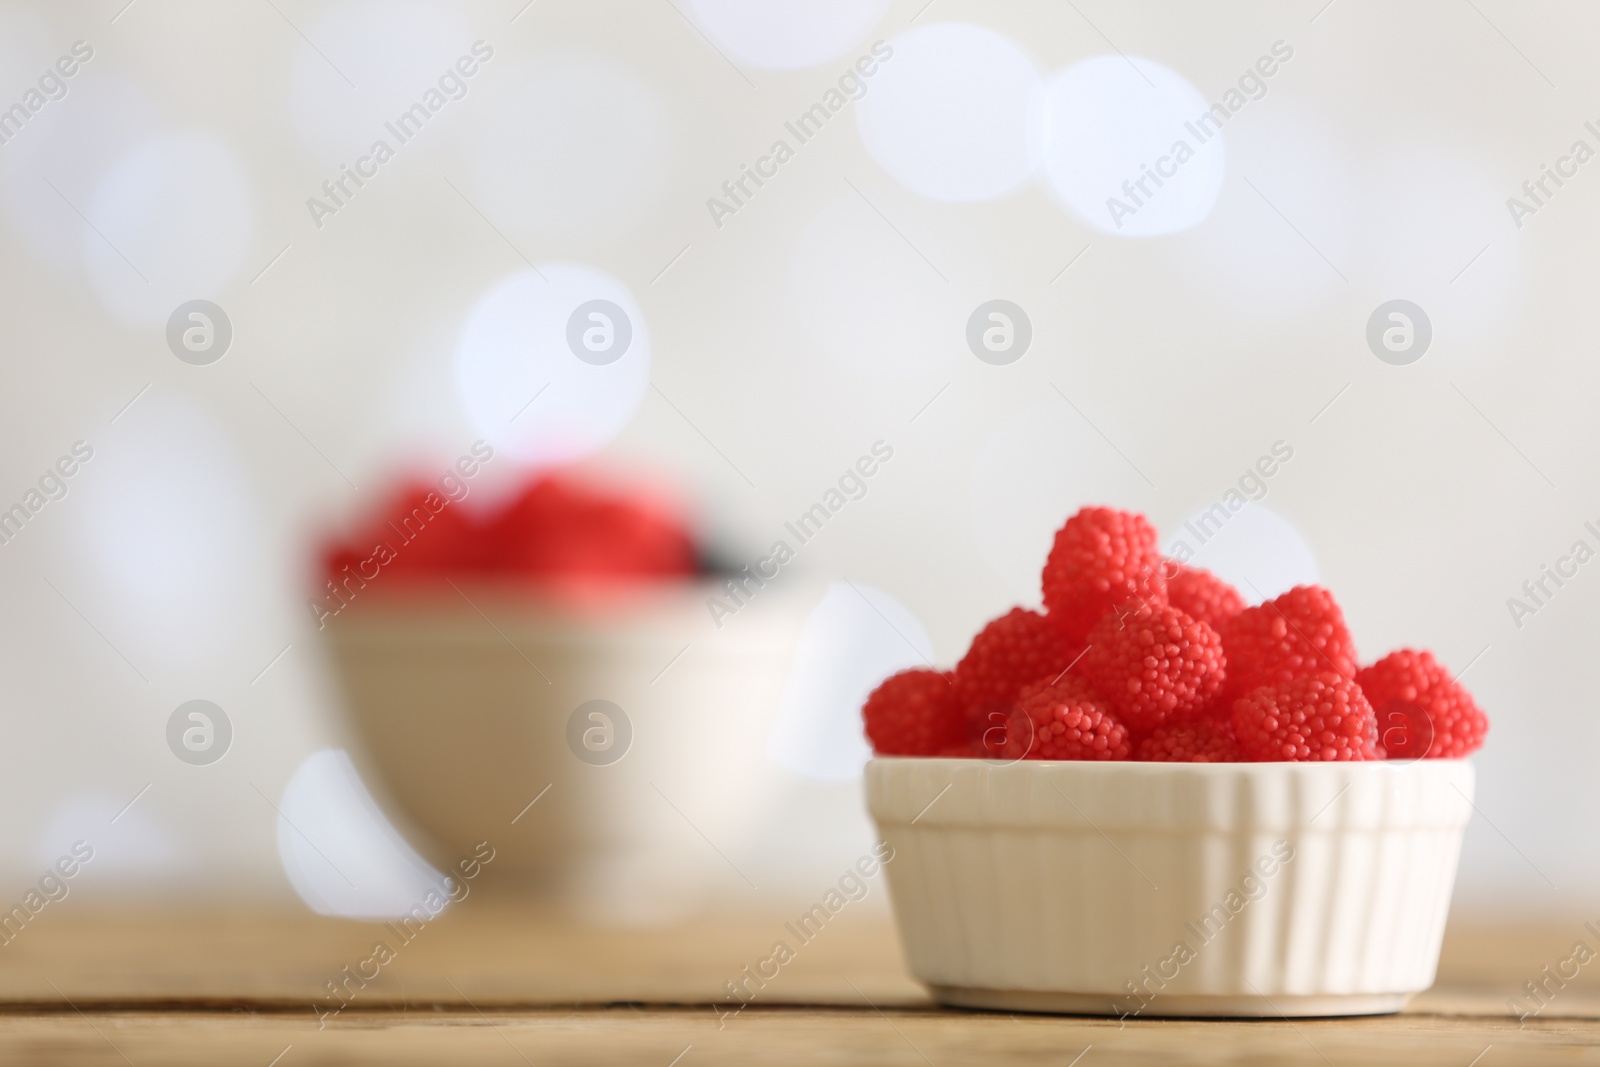 Photo of Delicious jelly candies on wooden table against blurred background, closeup. Space for text